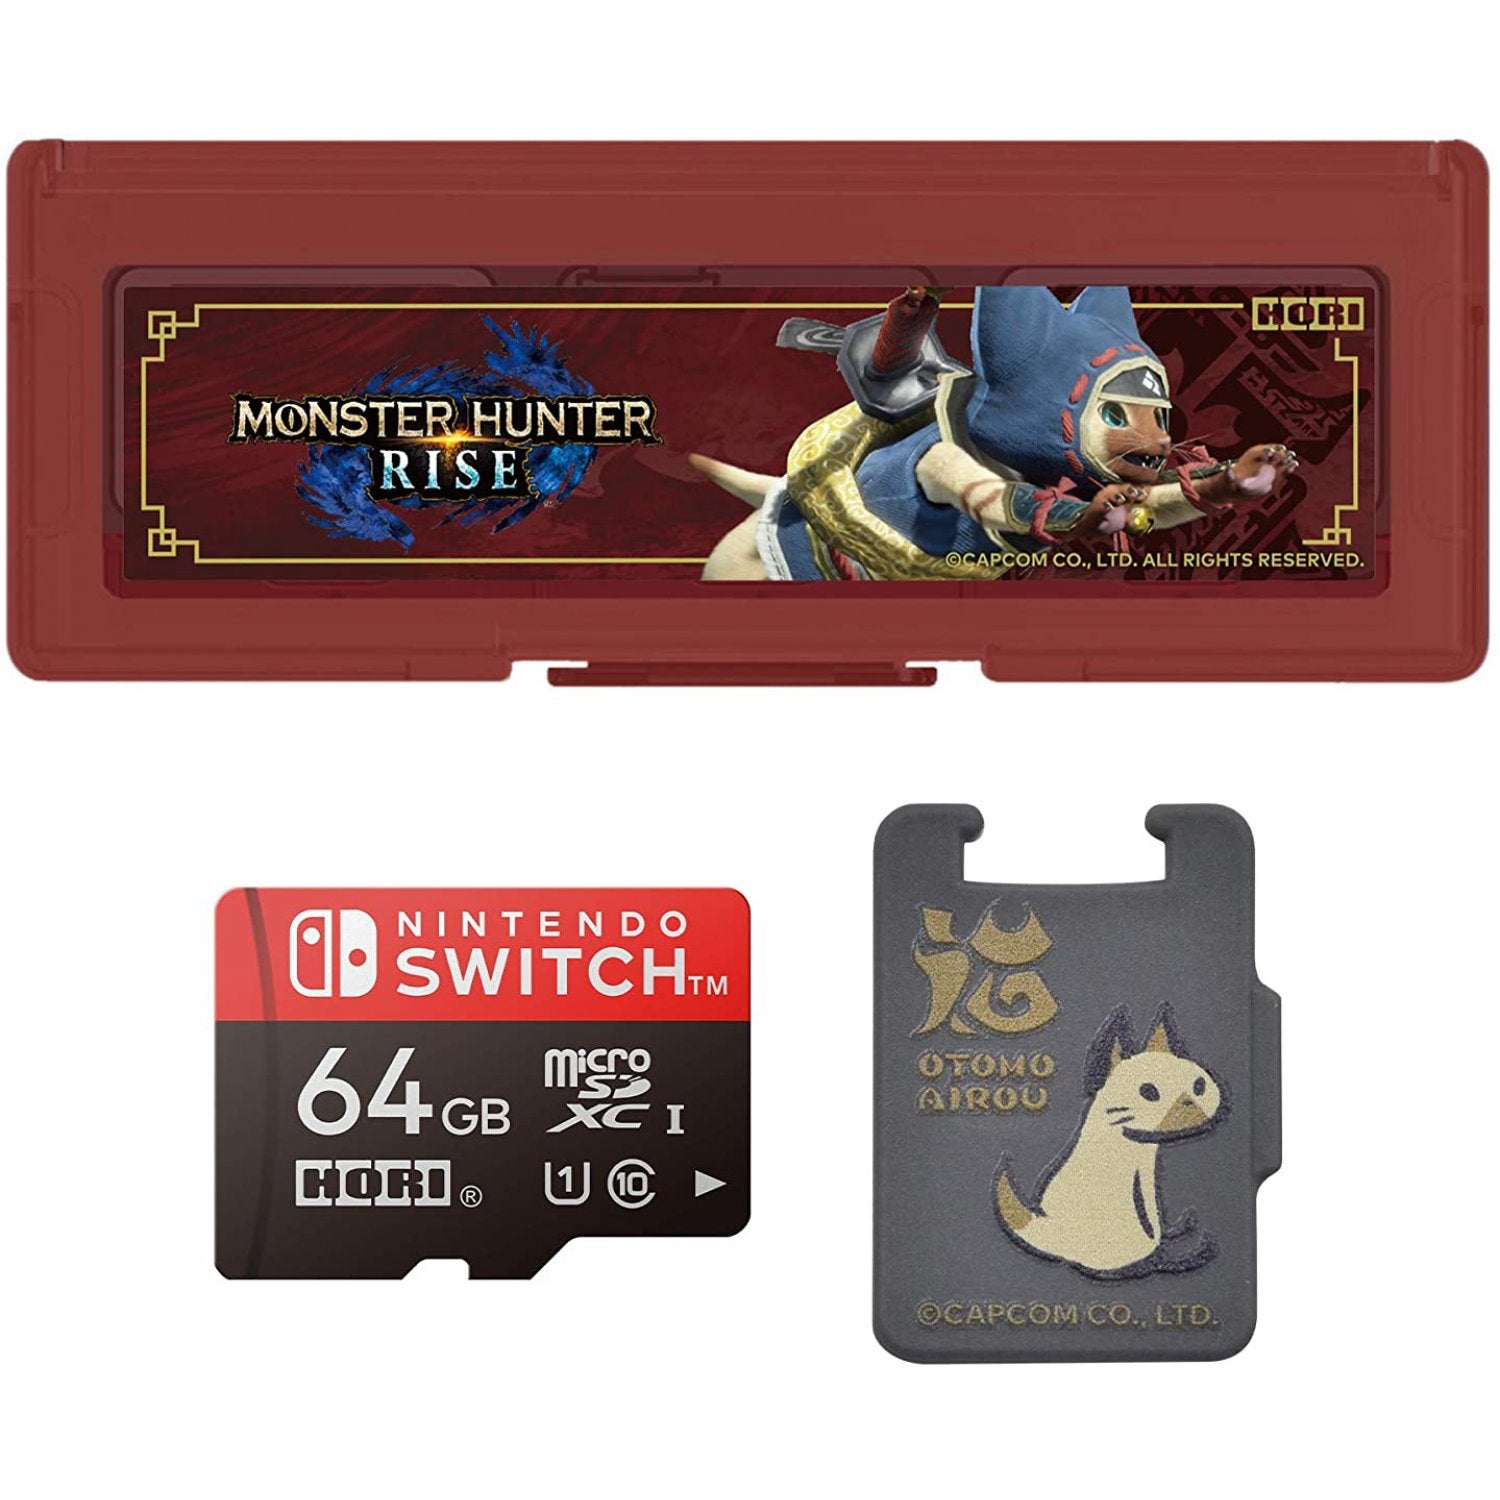 HORI NSW Monster Hunter Rise microSD Card 64GB & Card Case for 6 (AD19-001)